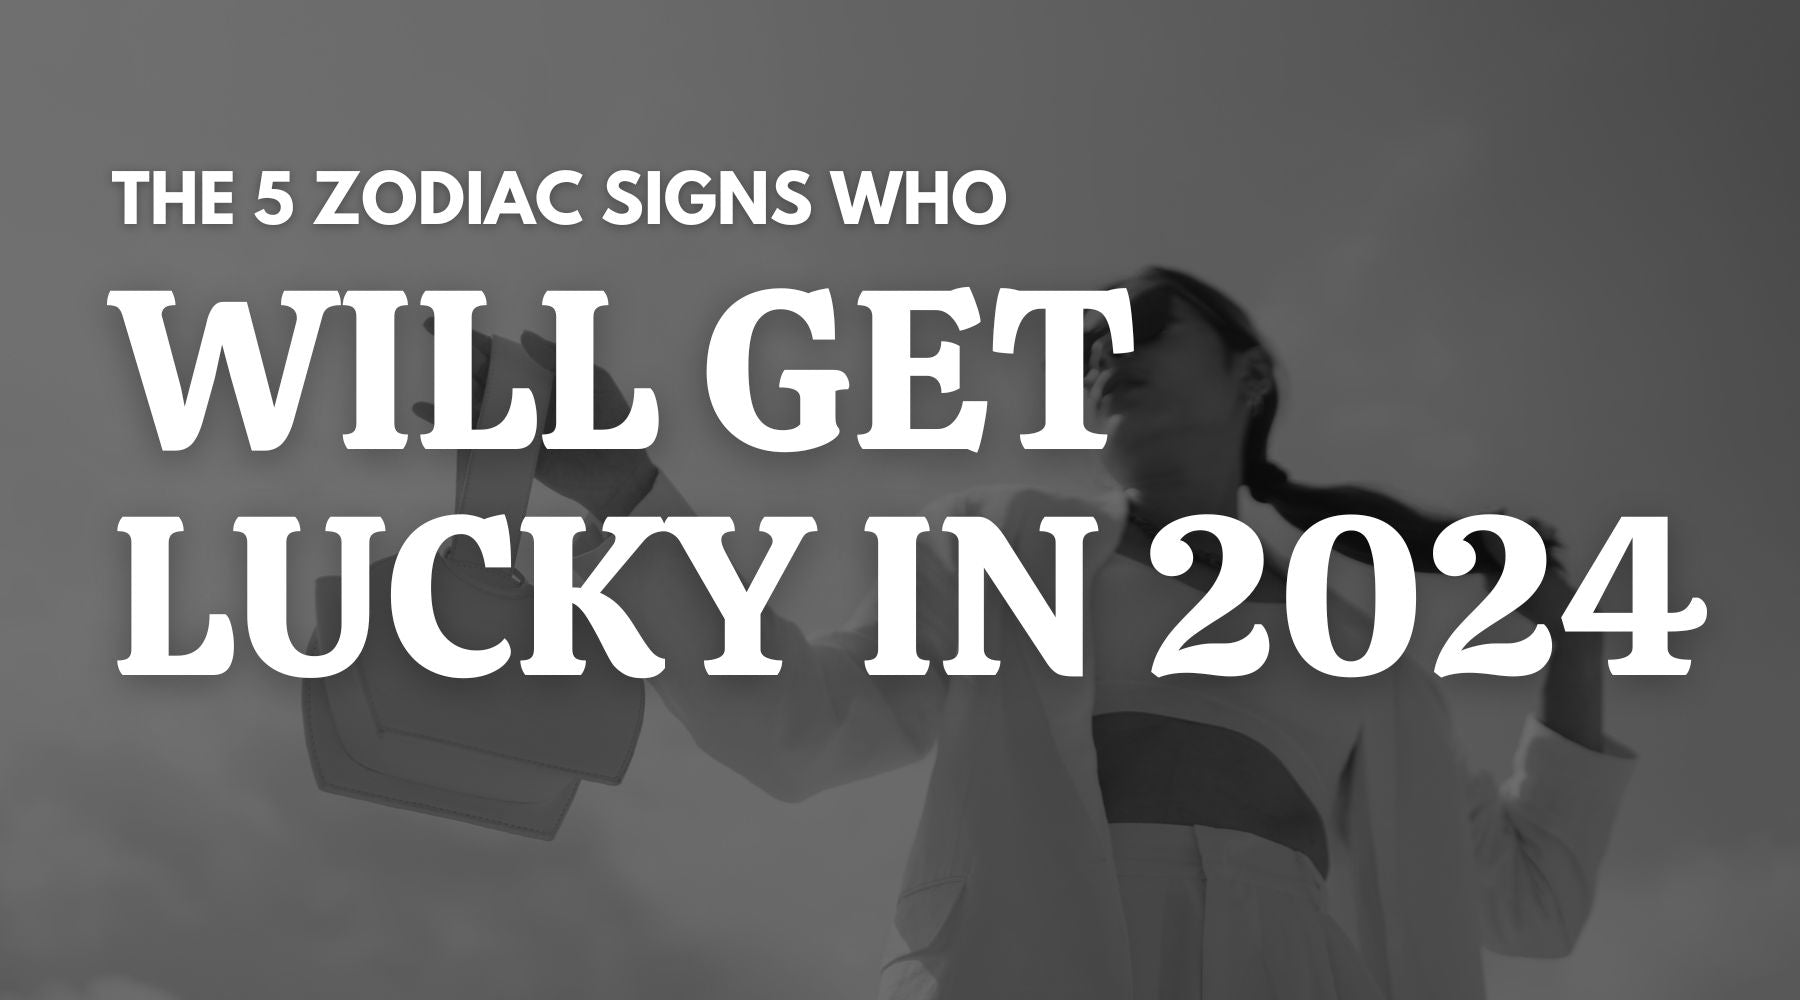 The 5 zodiac signs, who will get lucky in 2024